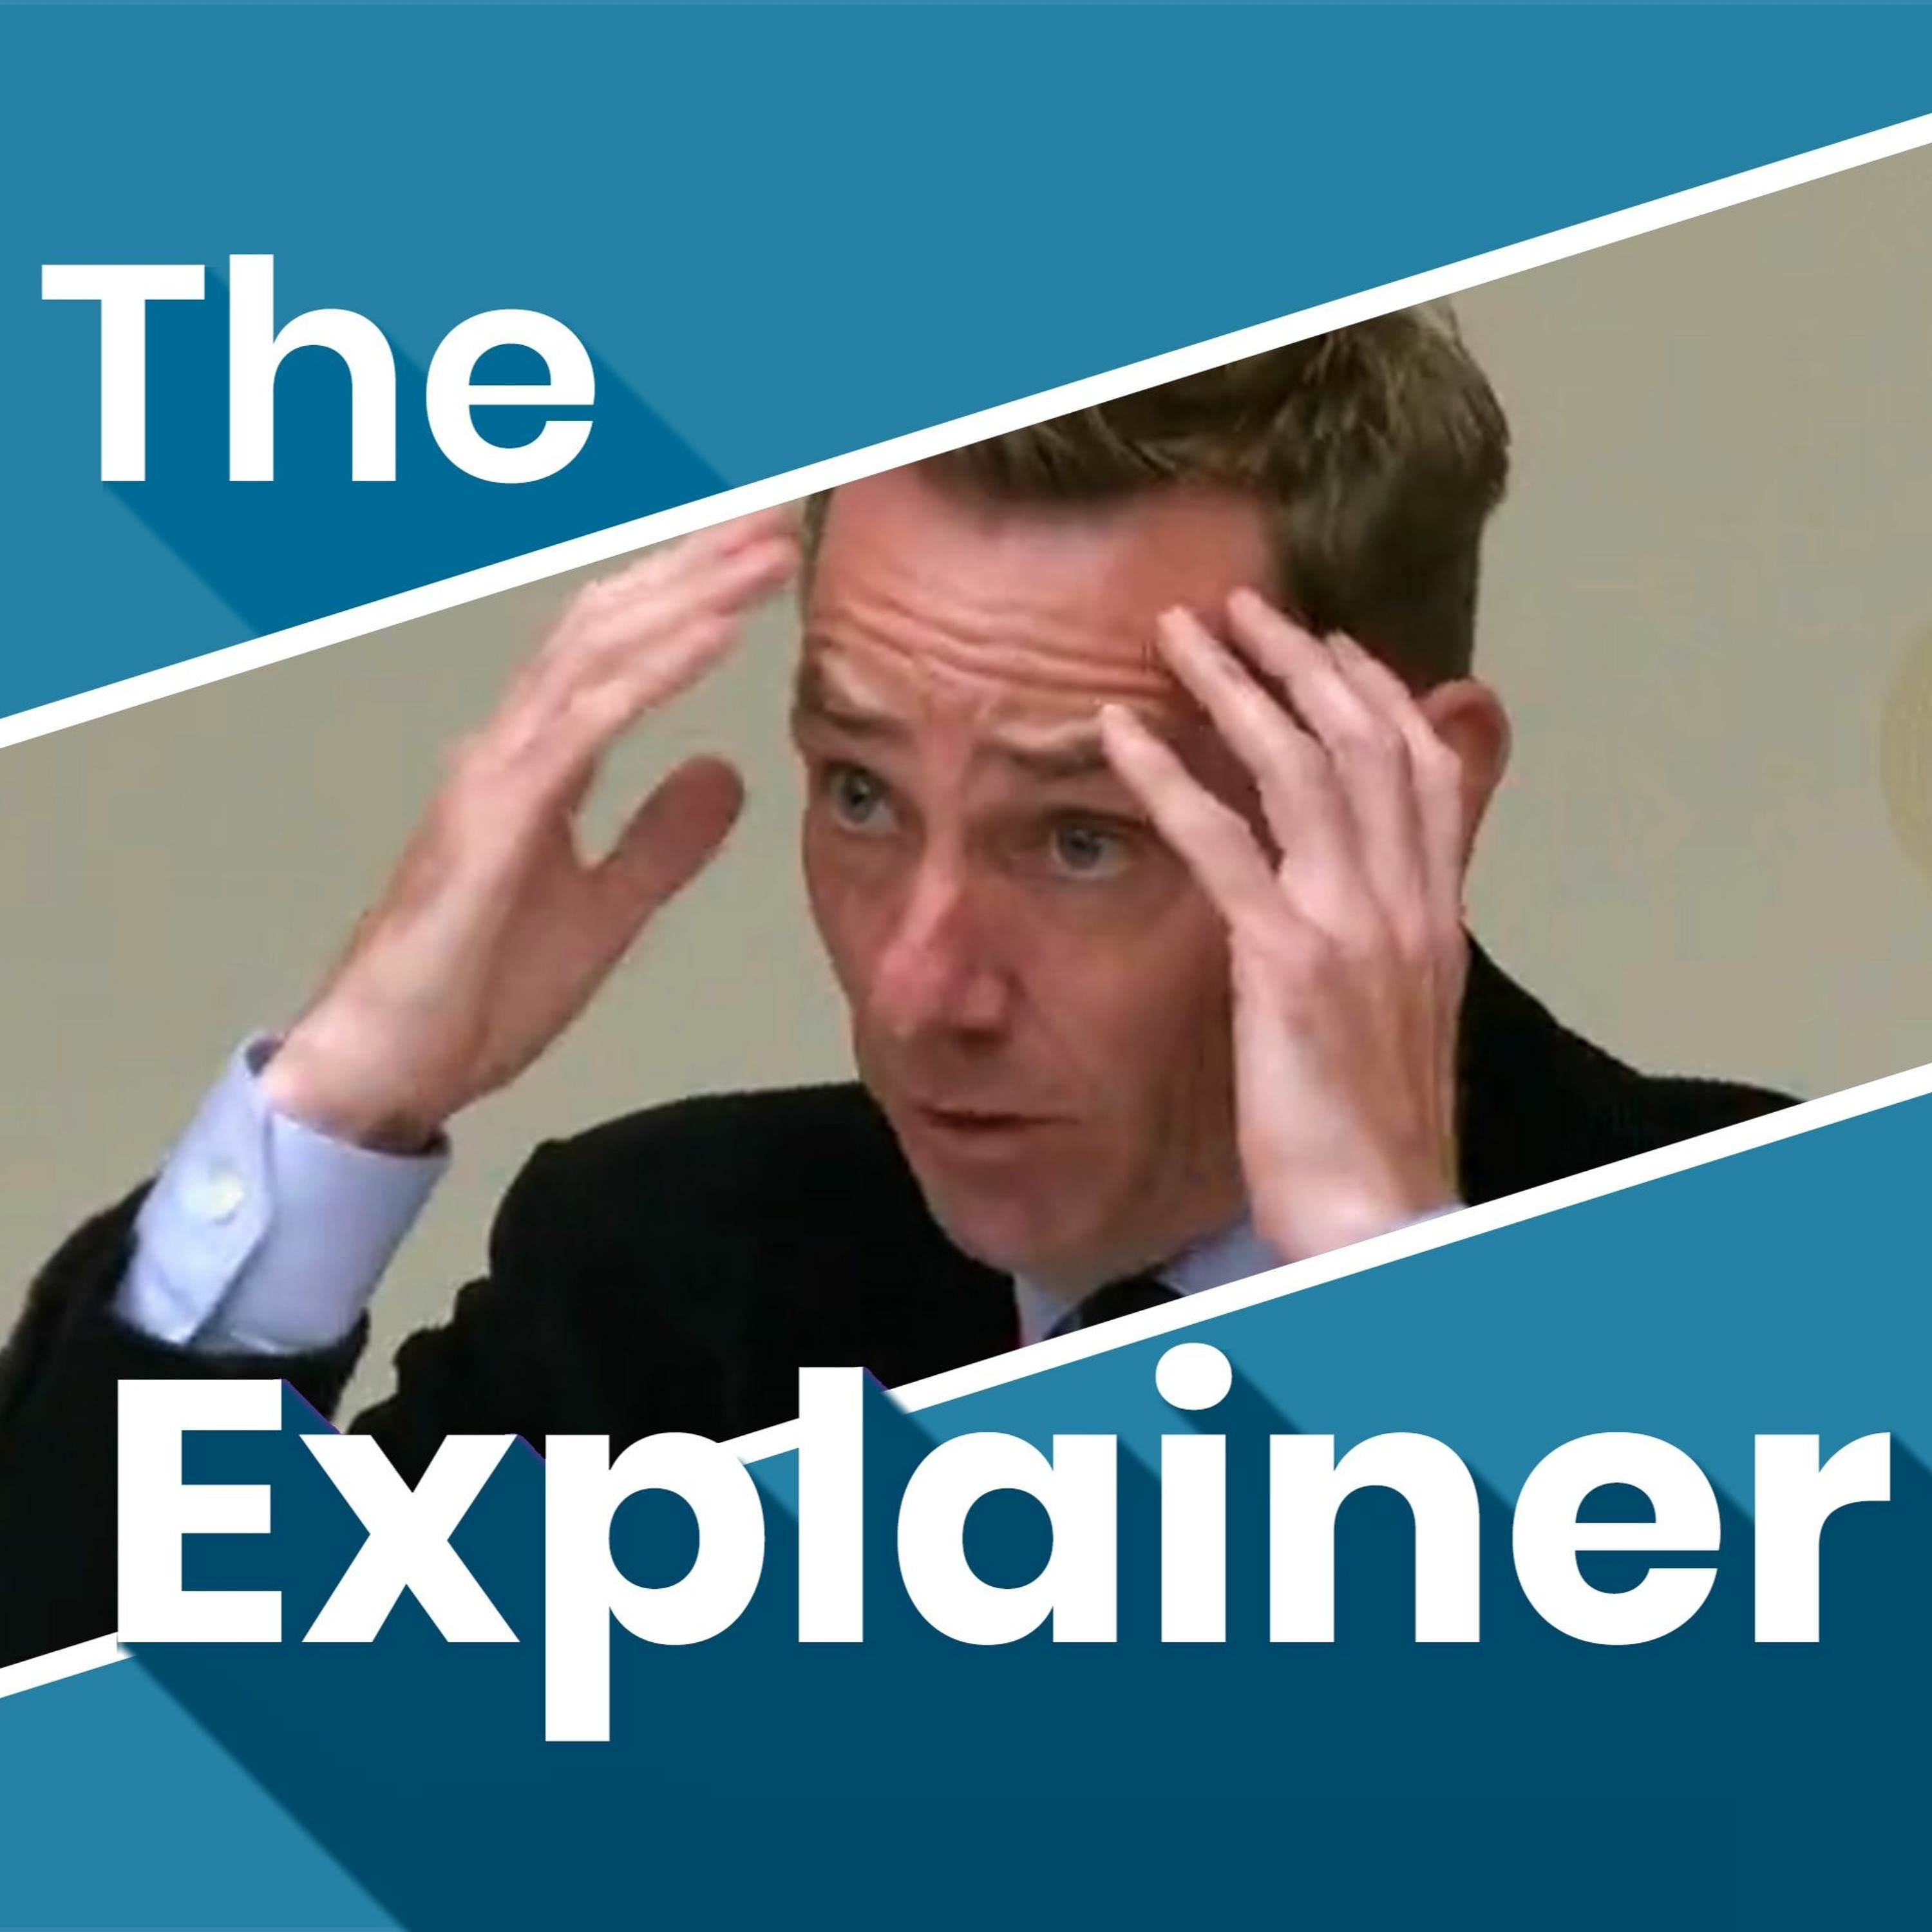 How do Oireachtas committees work, and how did Tubridy end up in front of one?